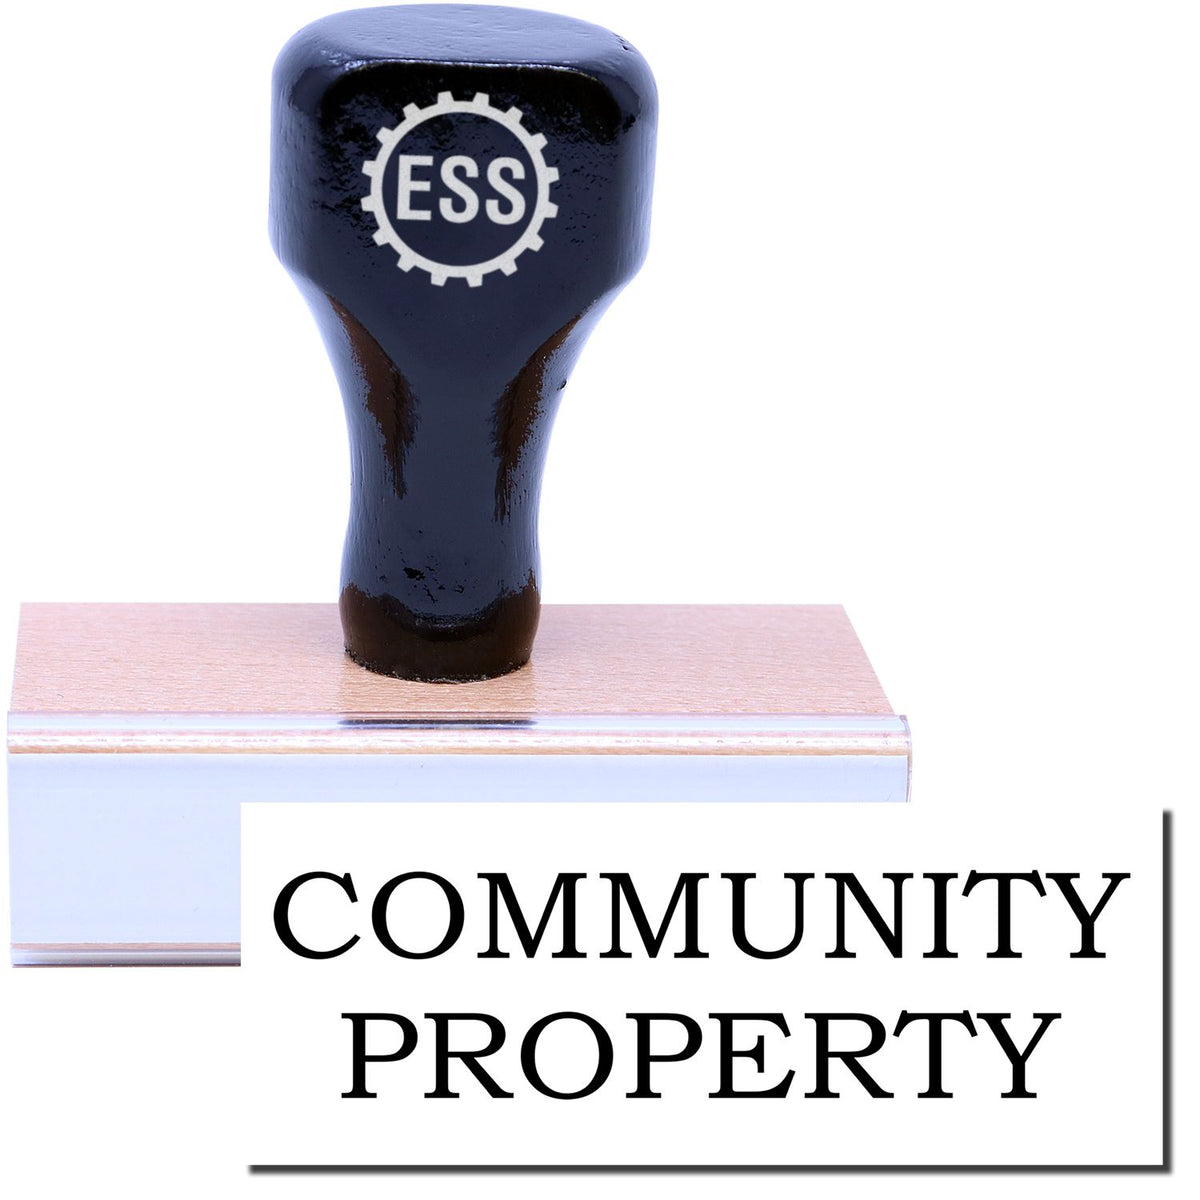 A stock office rubber stamp with a stamped image showing how the text &quot;COMMUNITY PROPERTY&quot; is displayed after stamping.